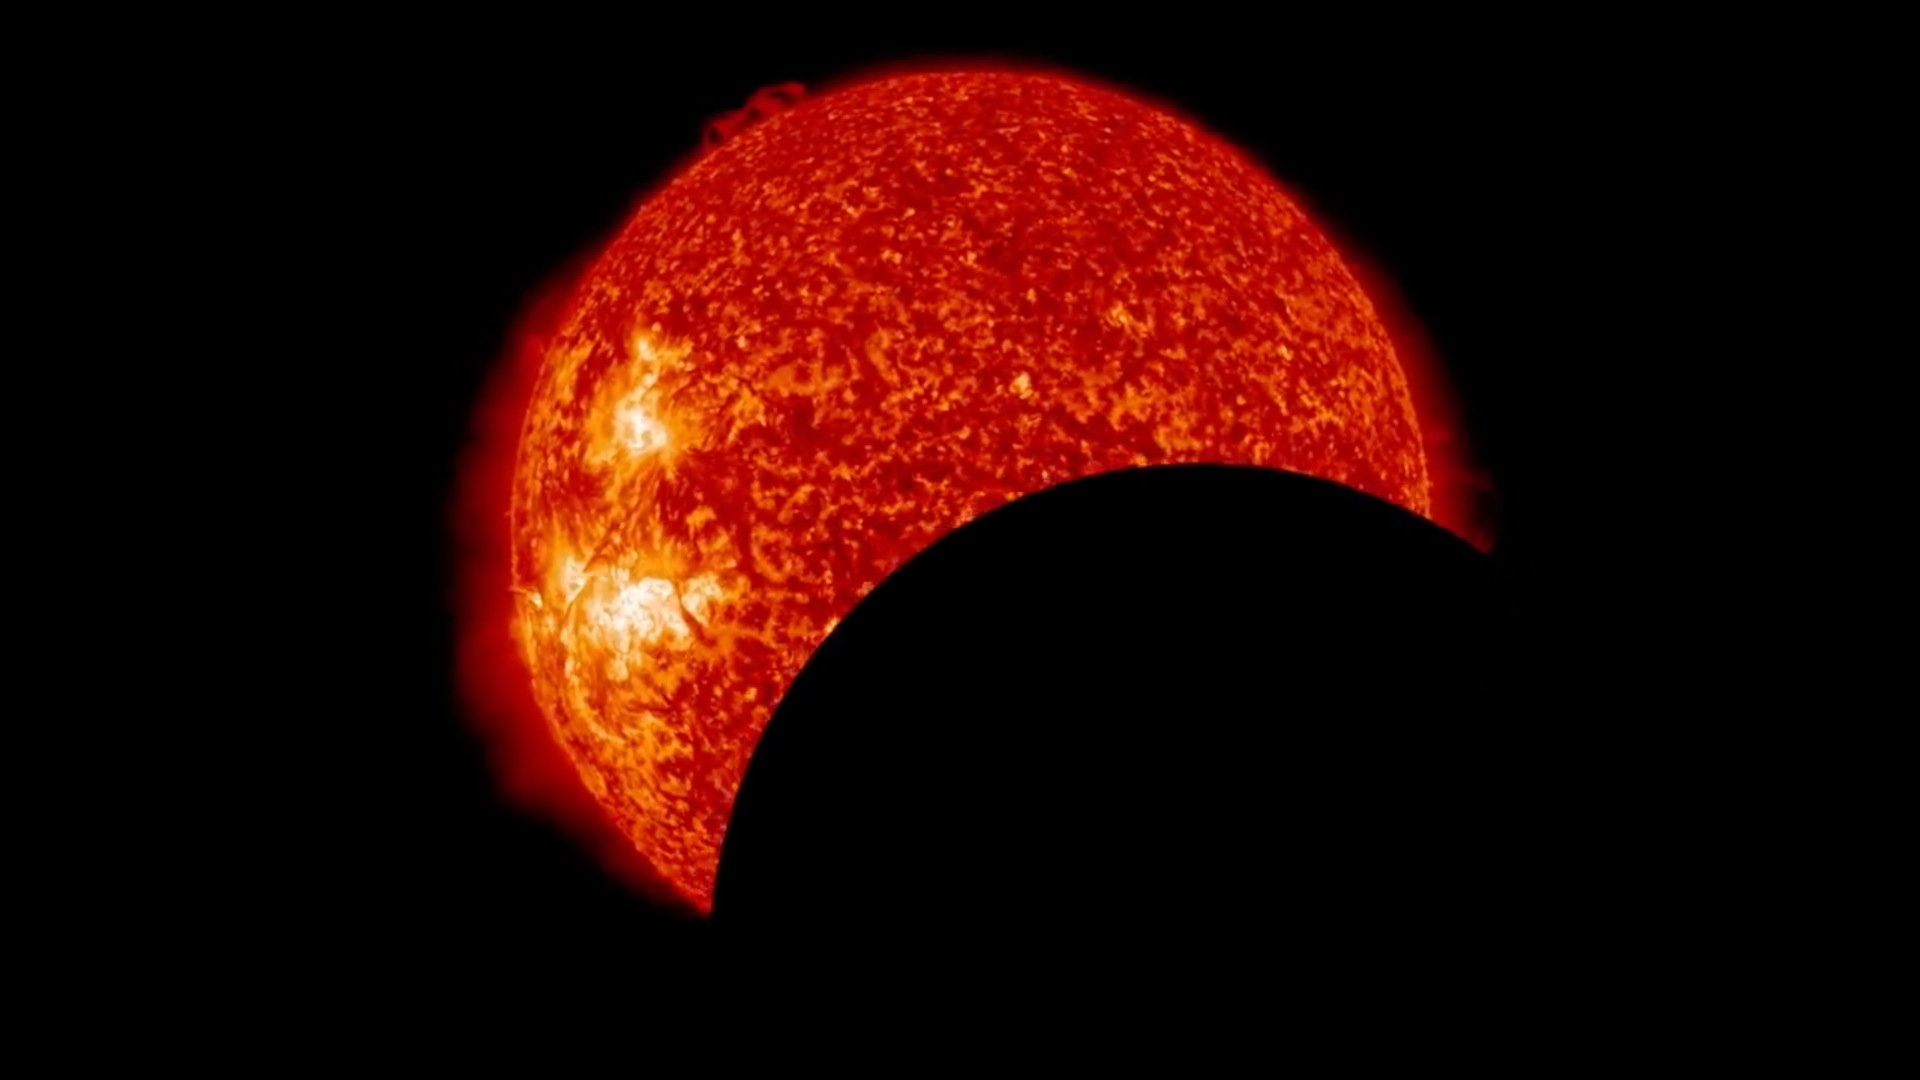 Video captures eclipse and solar flare